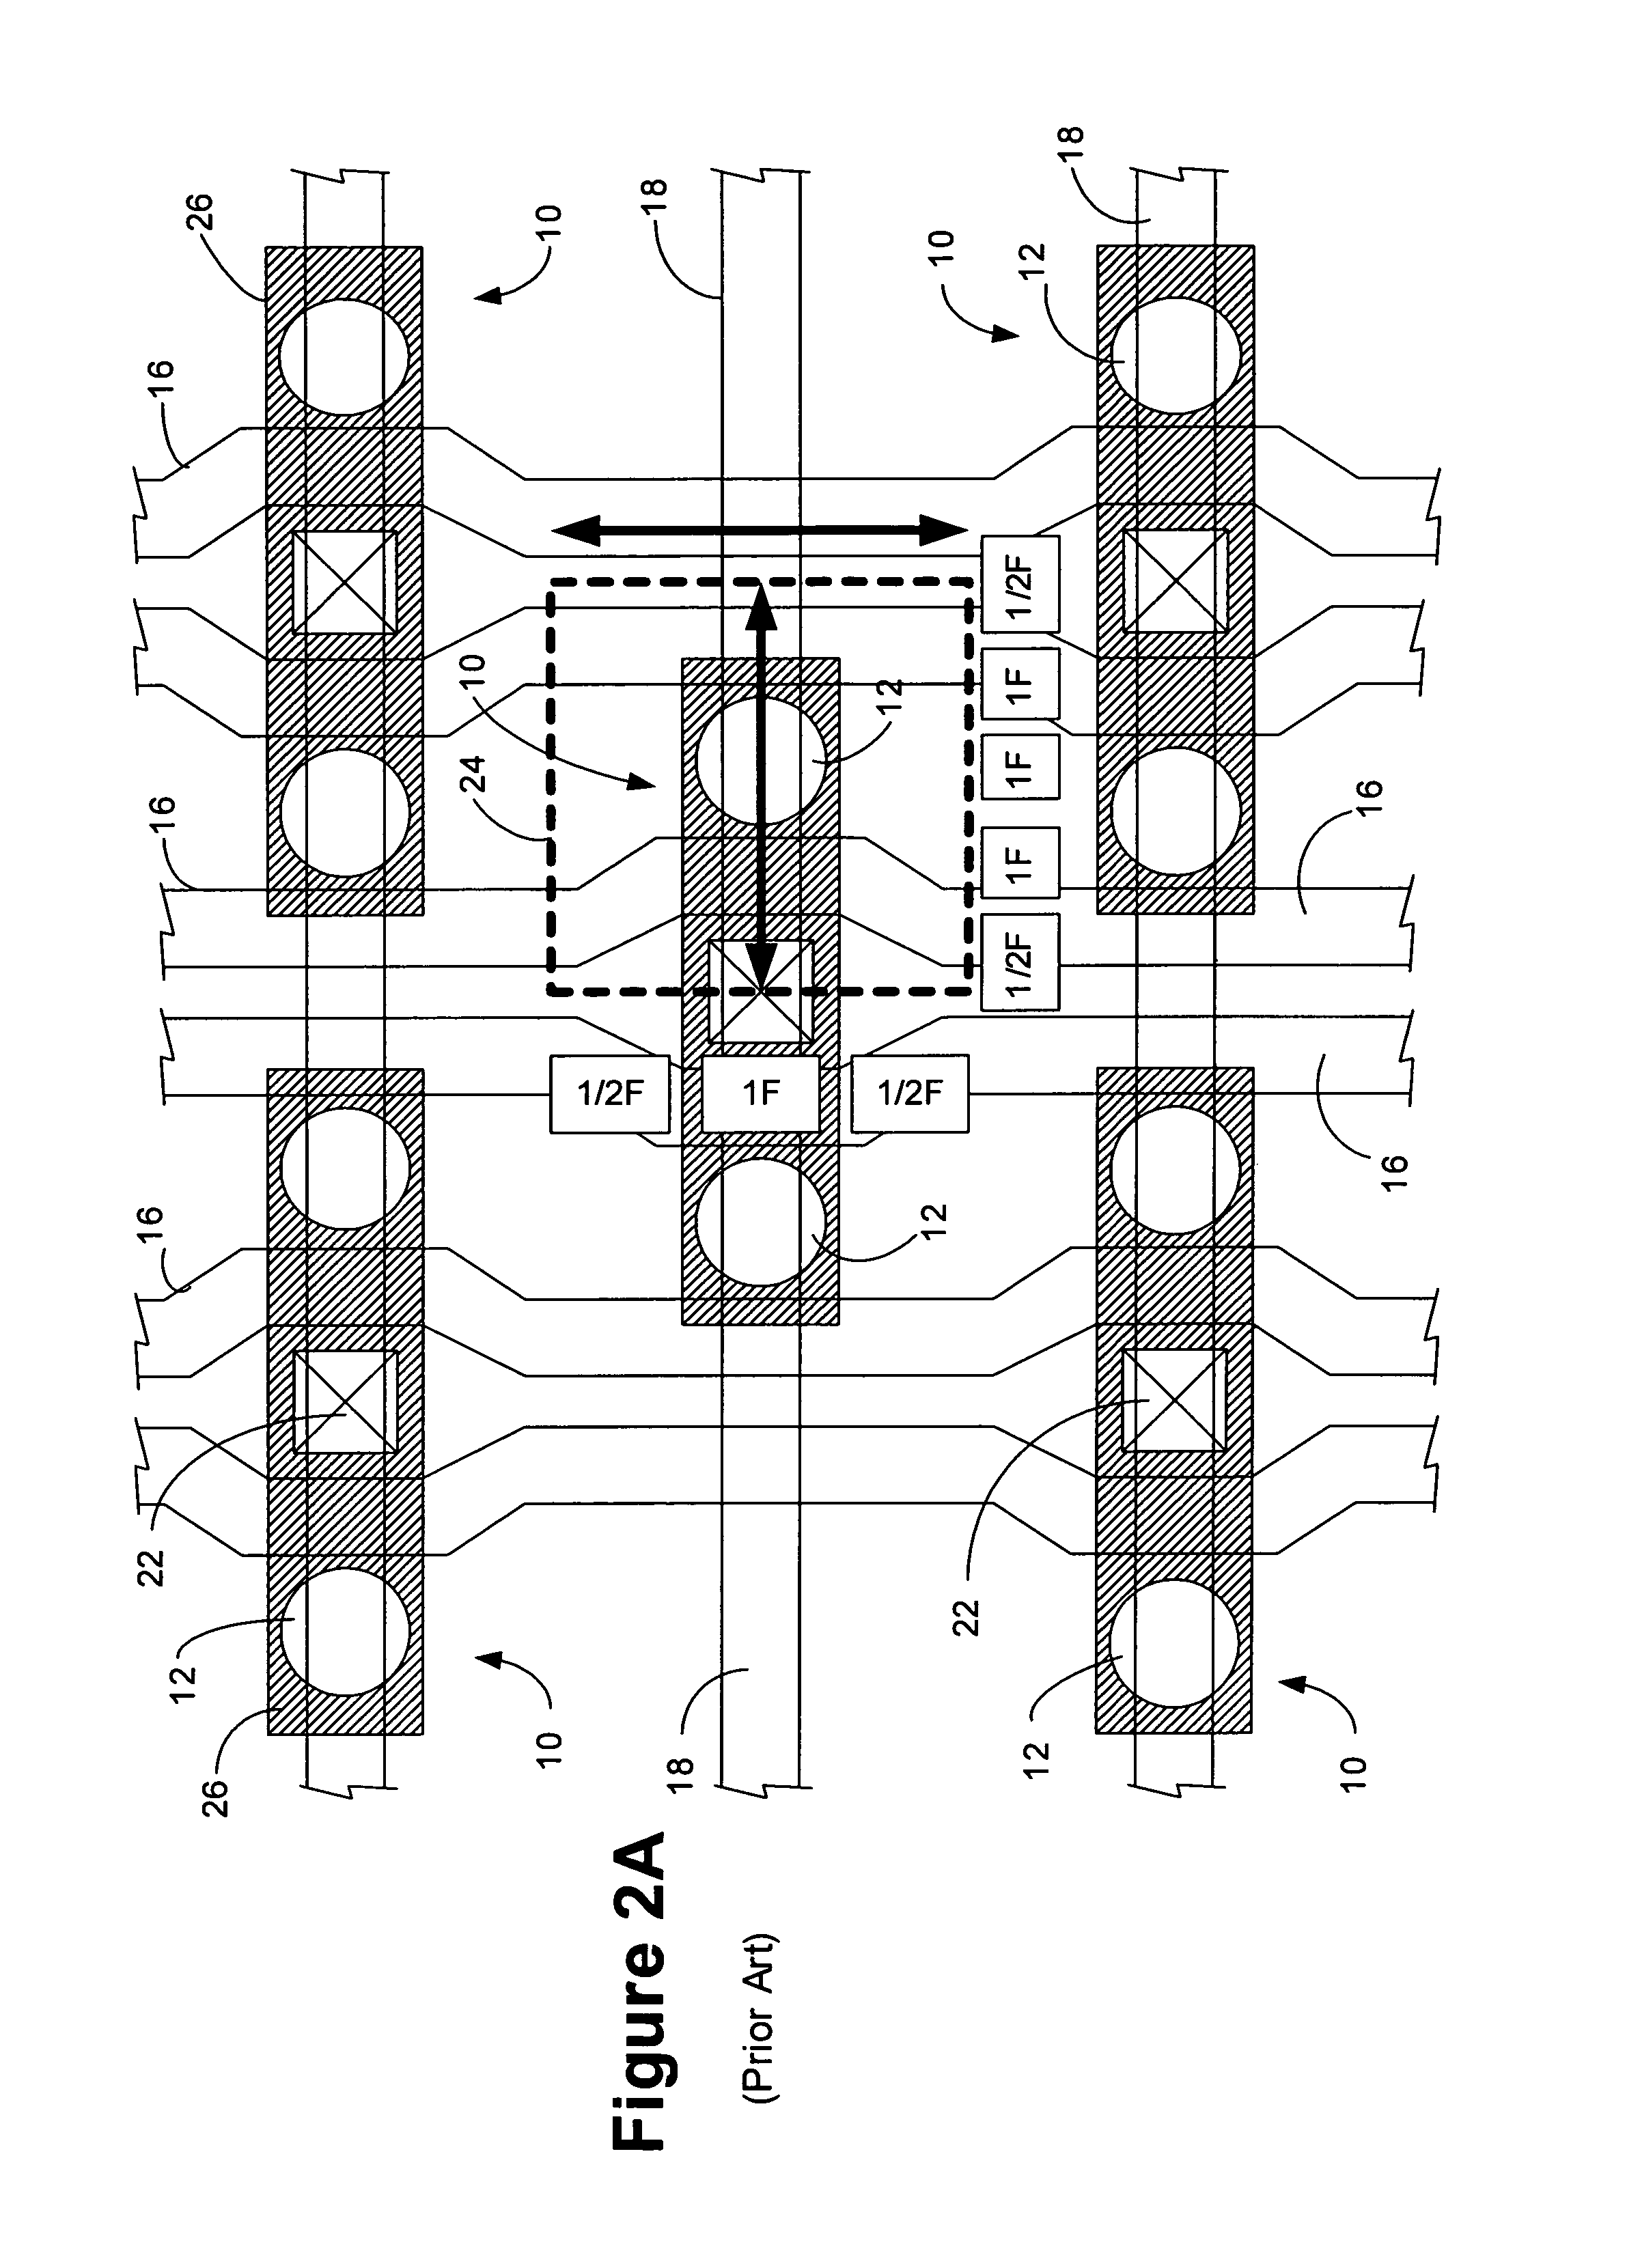 6F2 DRAM cell design with 3F-pitch folded digitline sense amplifier